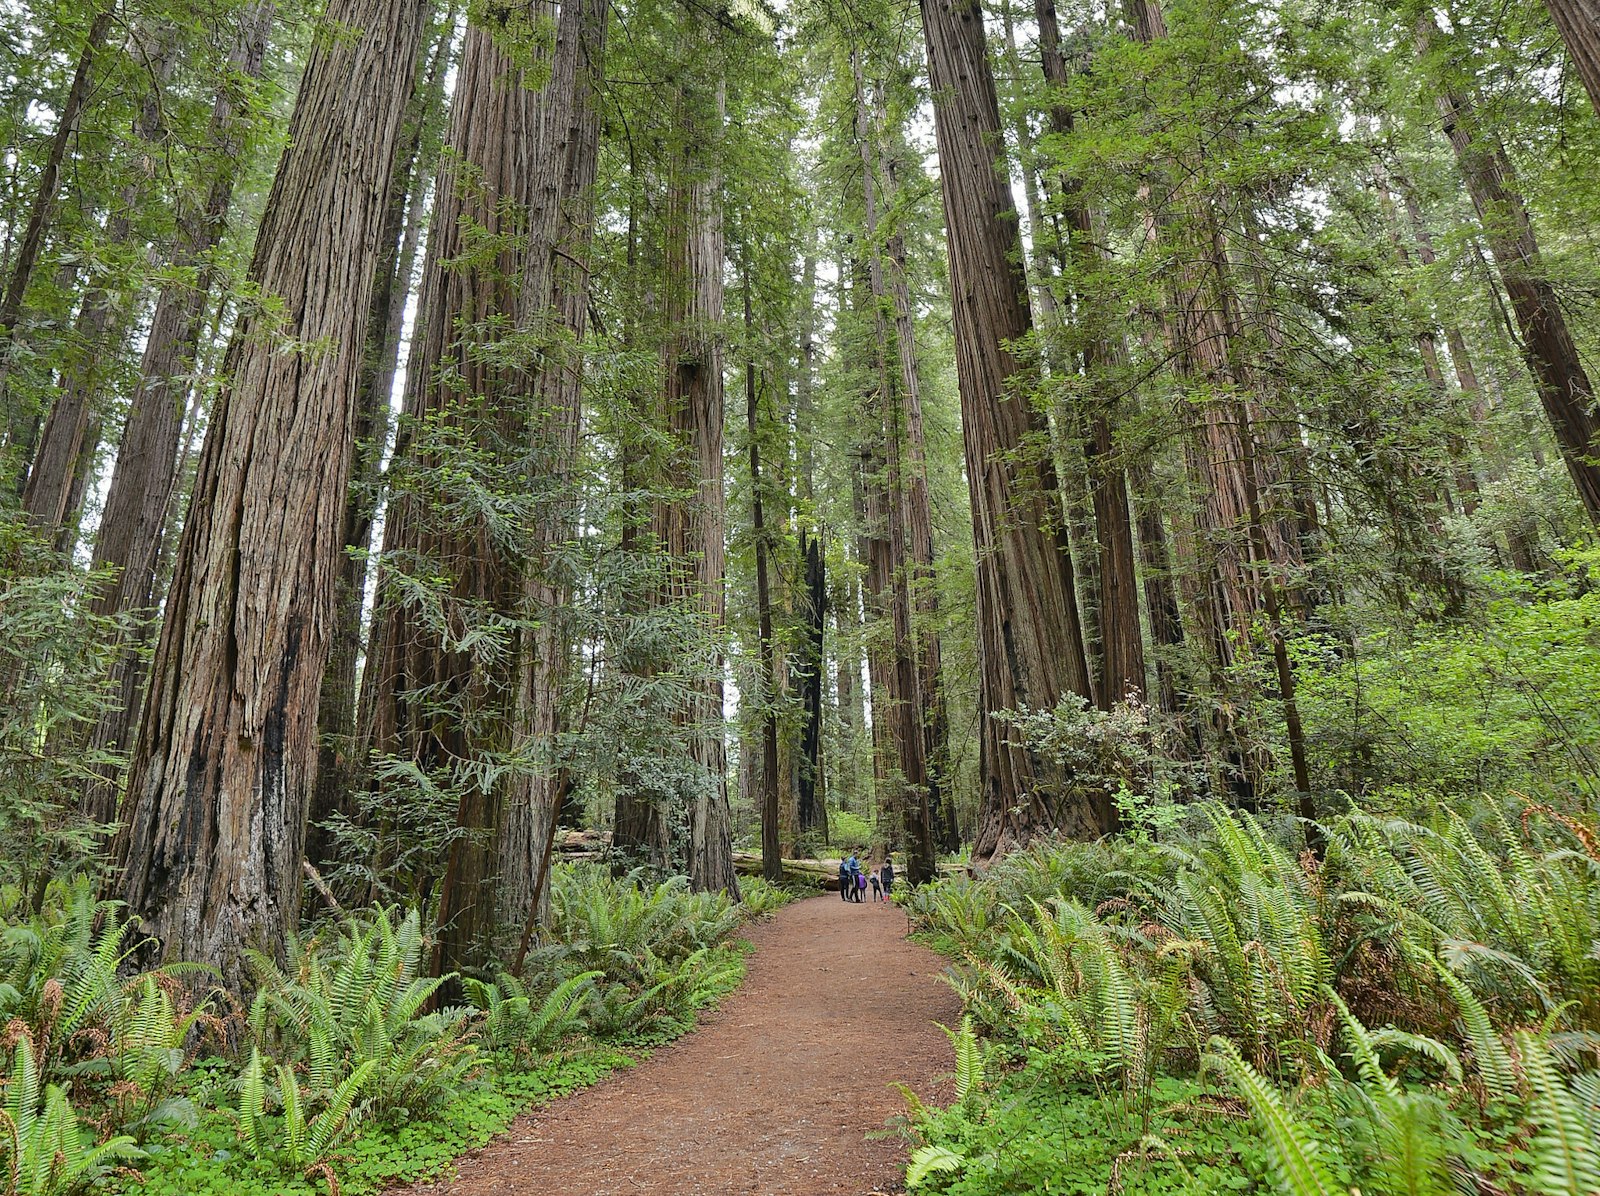 A group of people walk along a path through a redwood forest